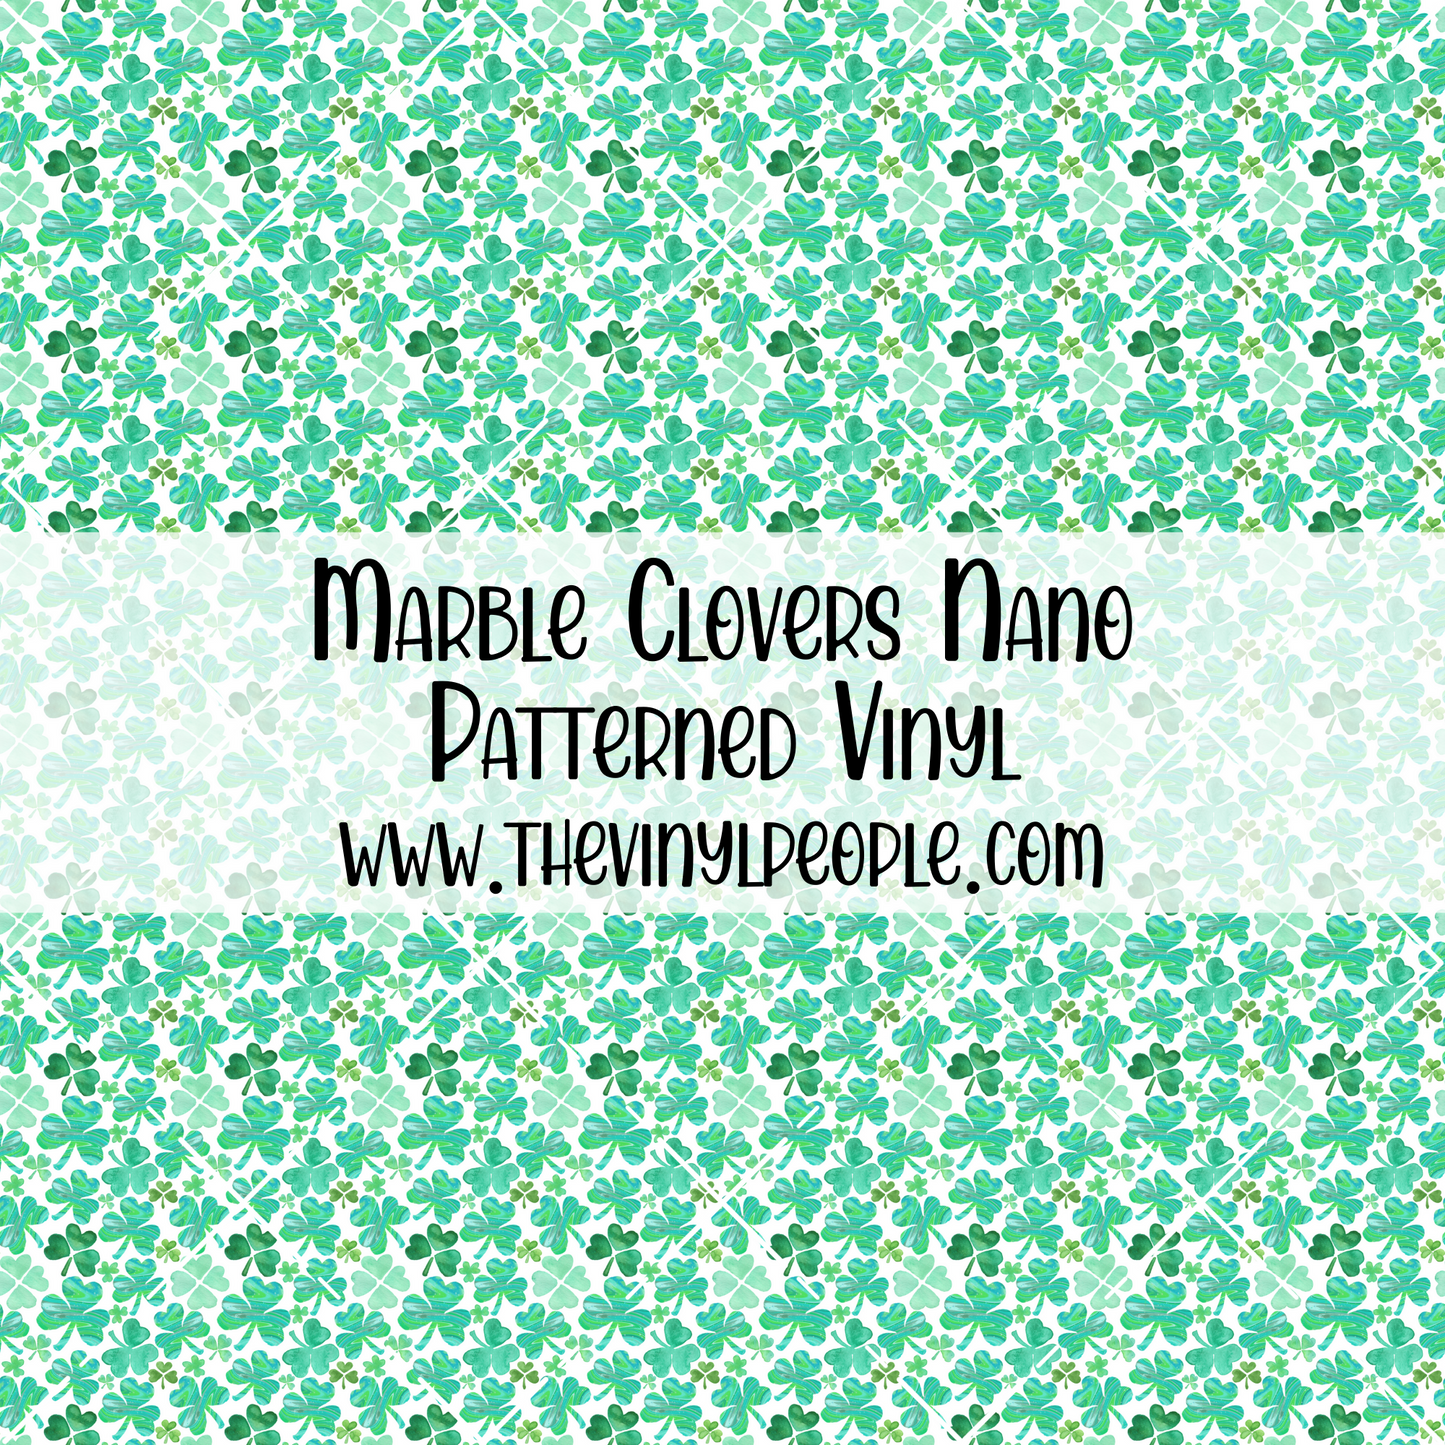 Marble Clovers Patterned Vinyl